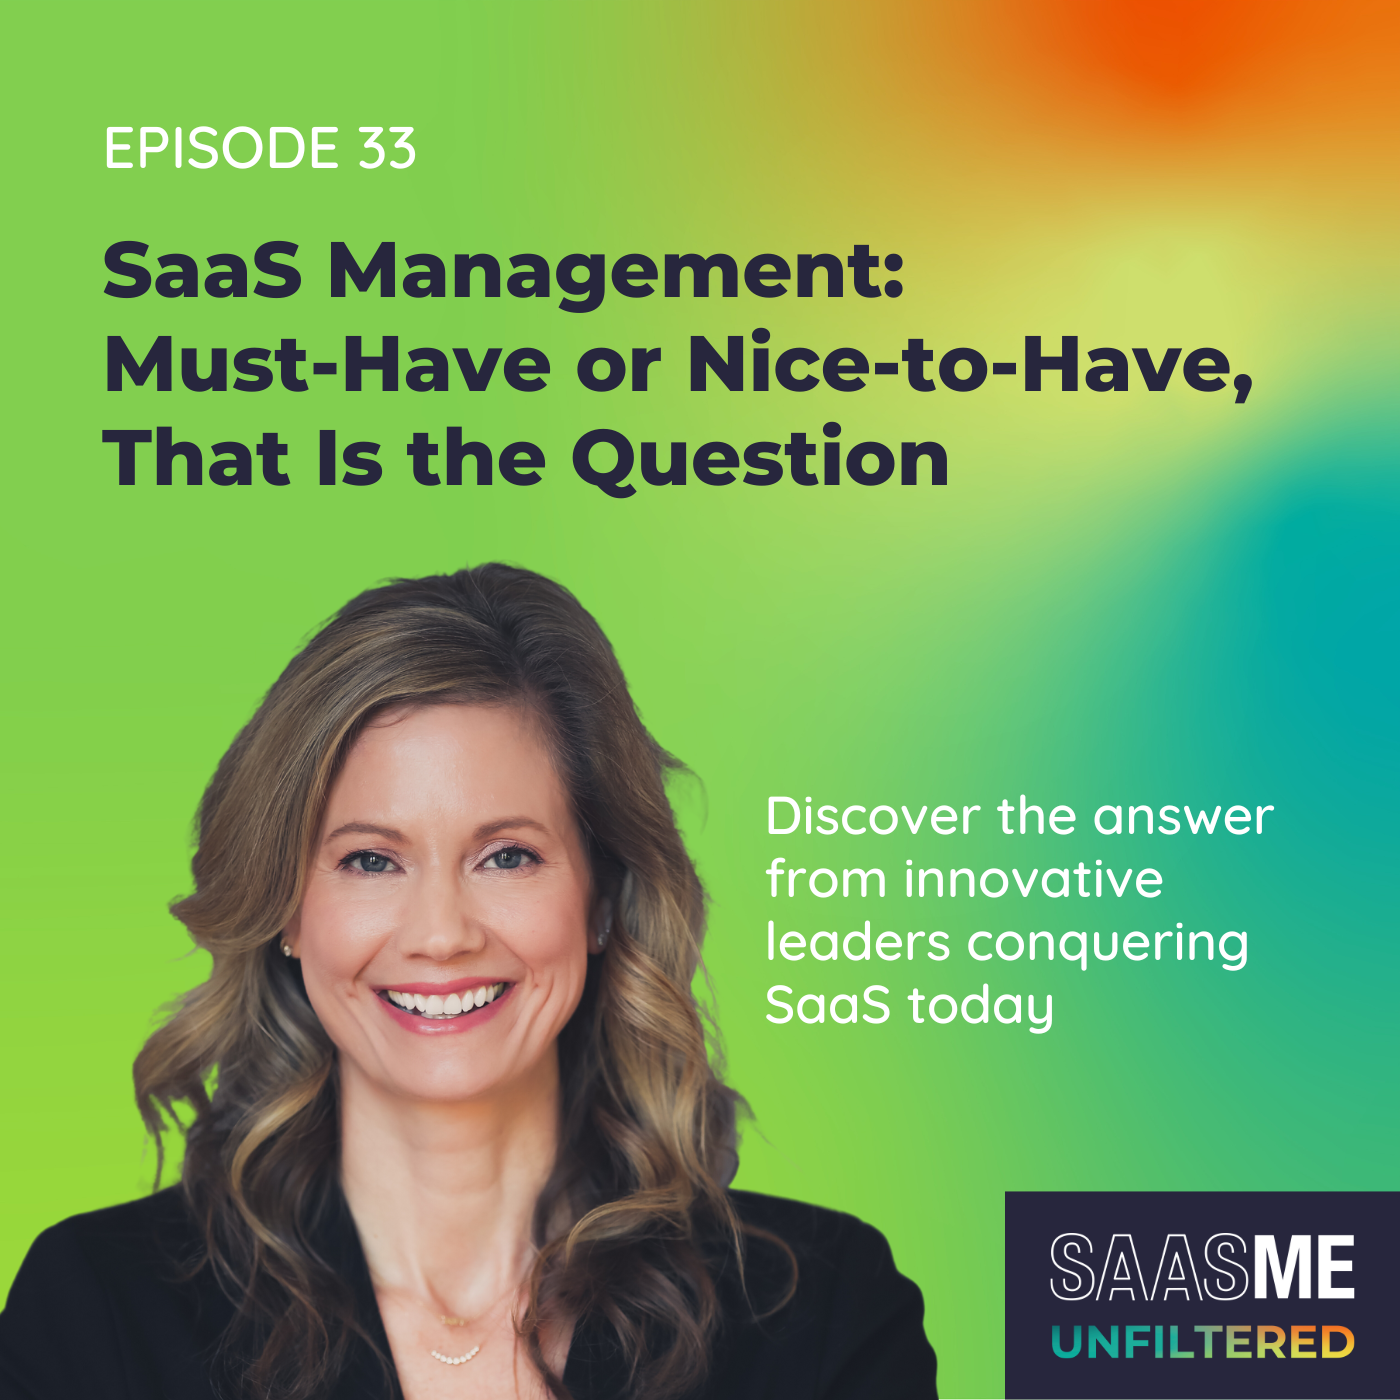 SaaS Management: Must-Have or Nice-to-Have, That Is the Question